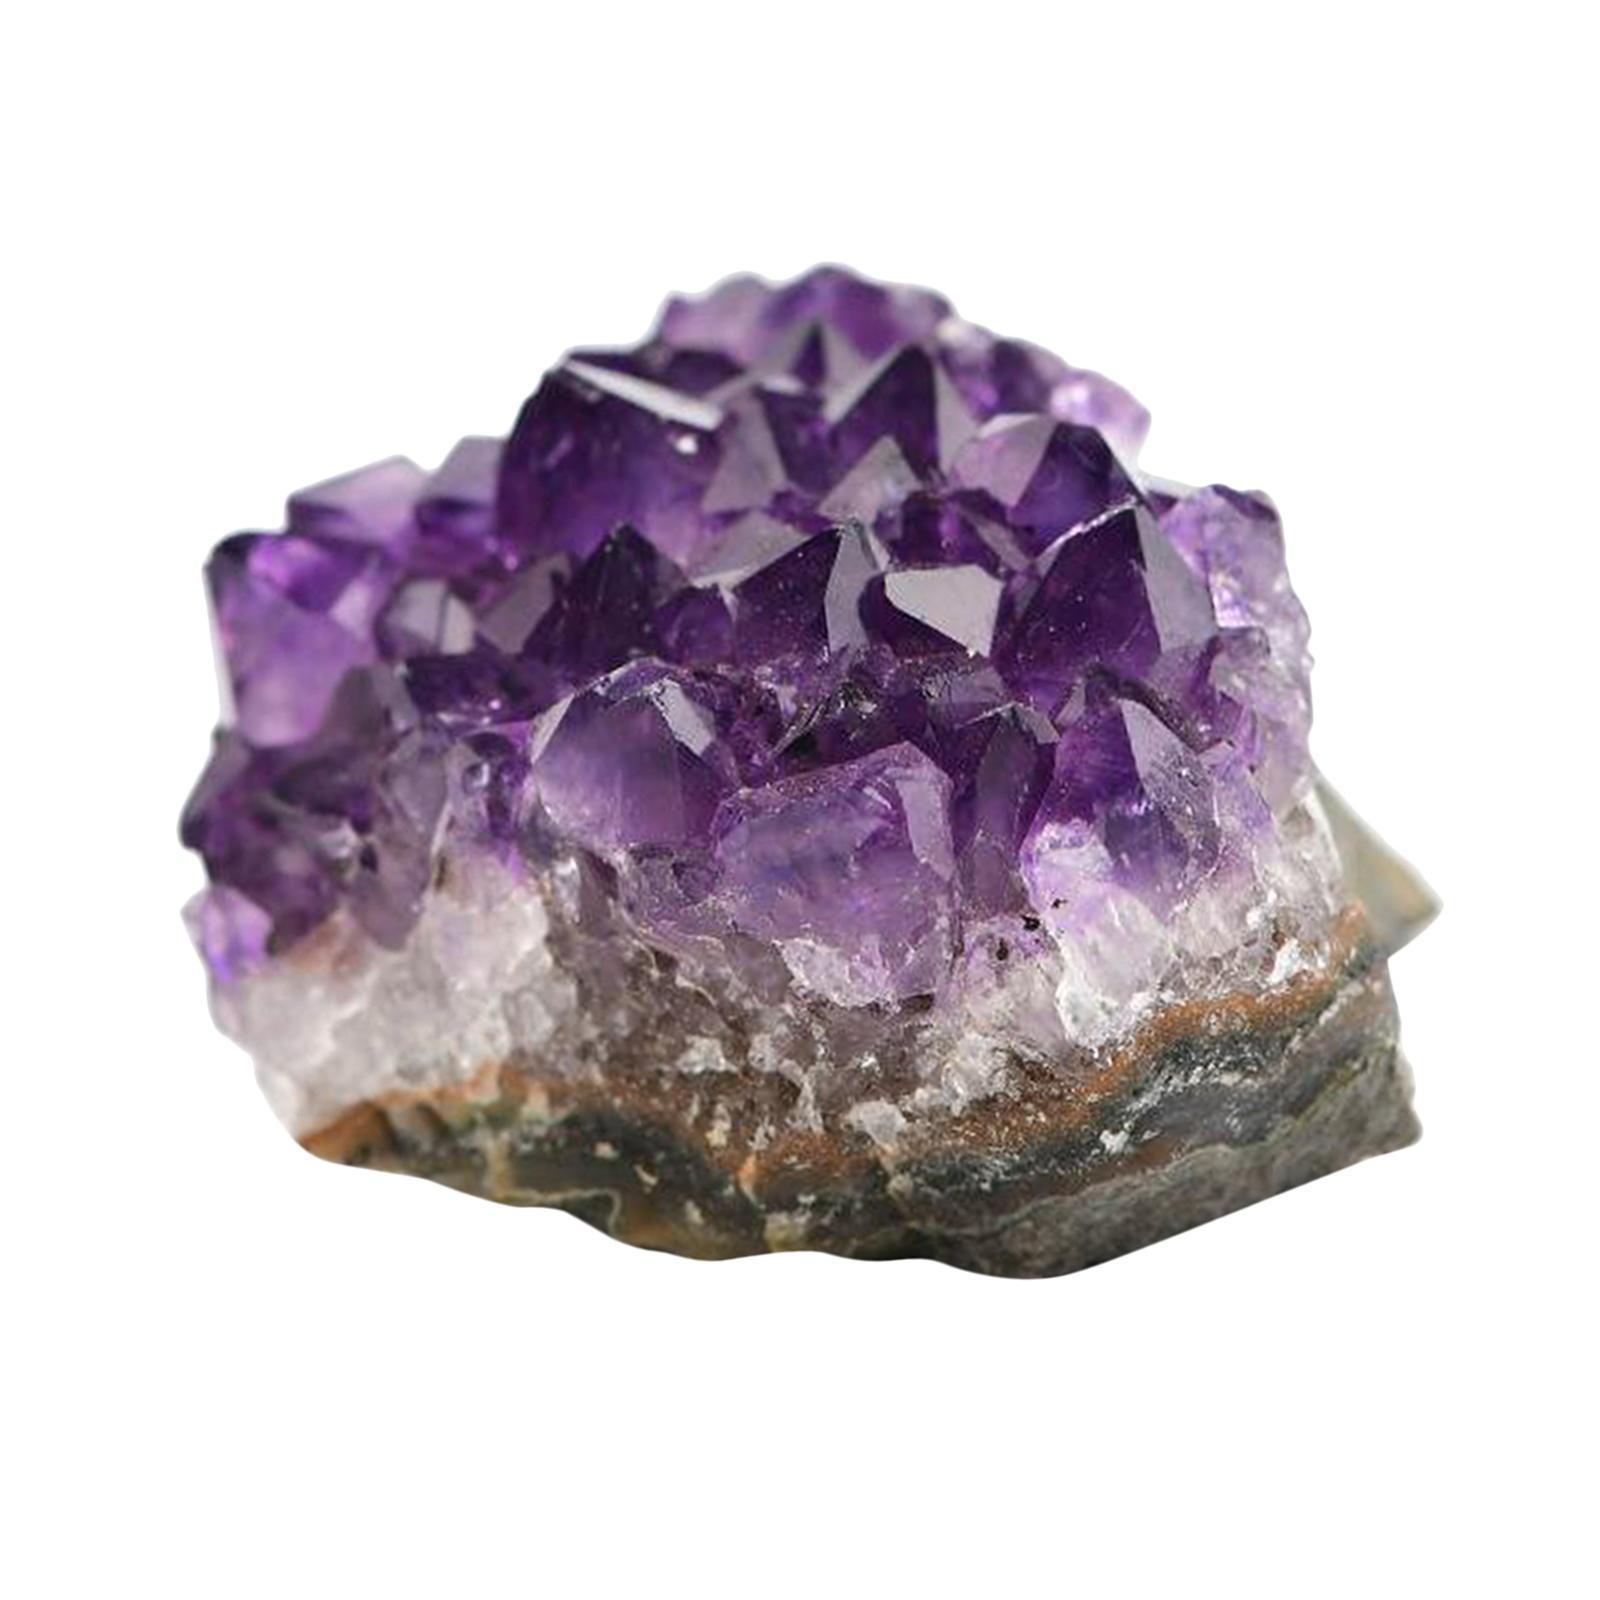 2x Natural Druse Amethysts Crystals Amethyst Crystal Cluster Natural Piece Decorative Stones